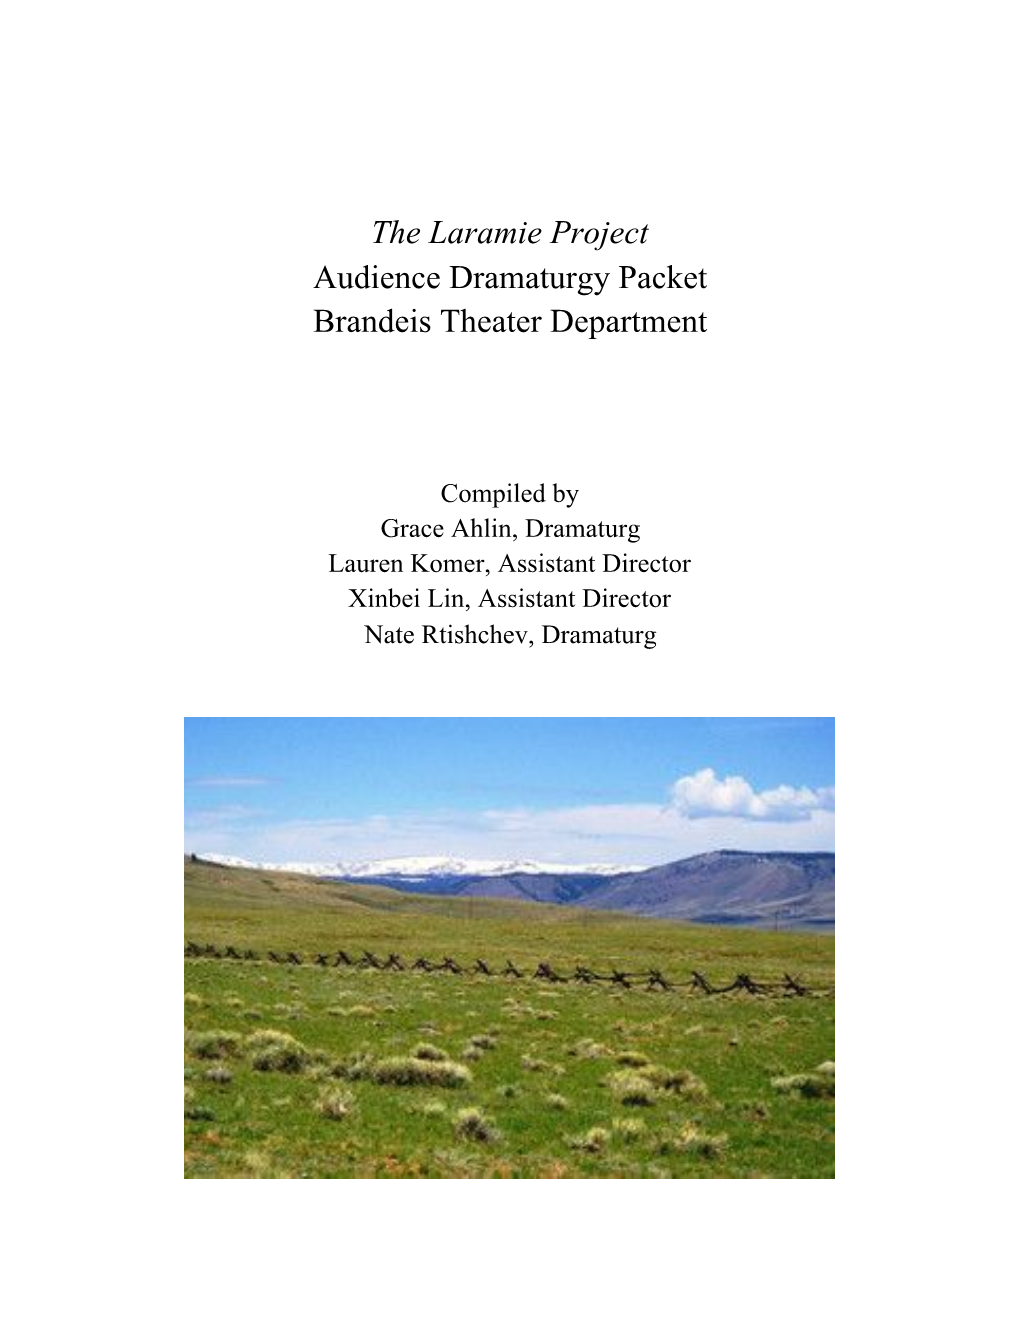 The Laramie Project Audience Dramaturgy Packet Brandeis Theater Department